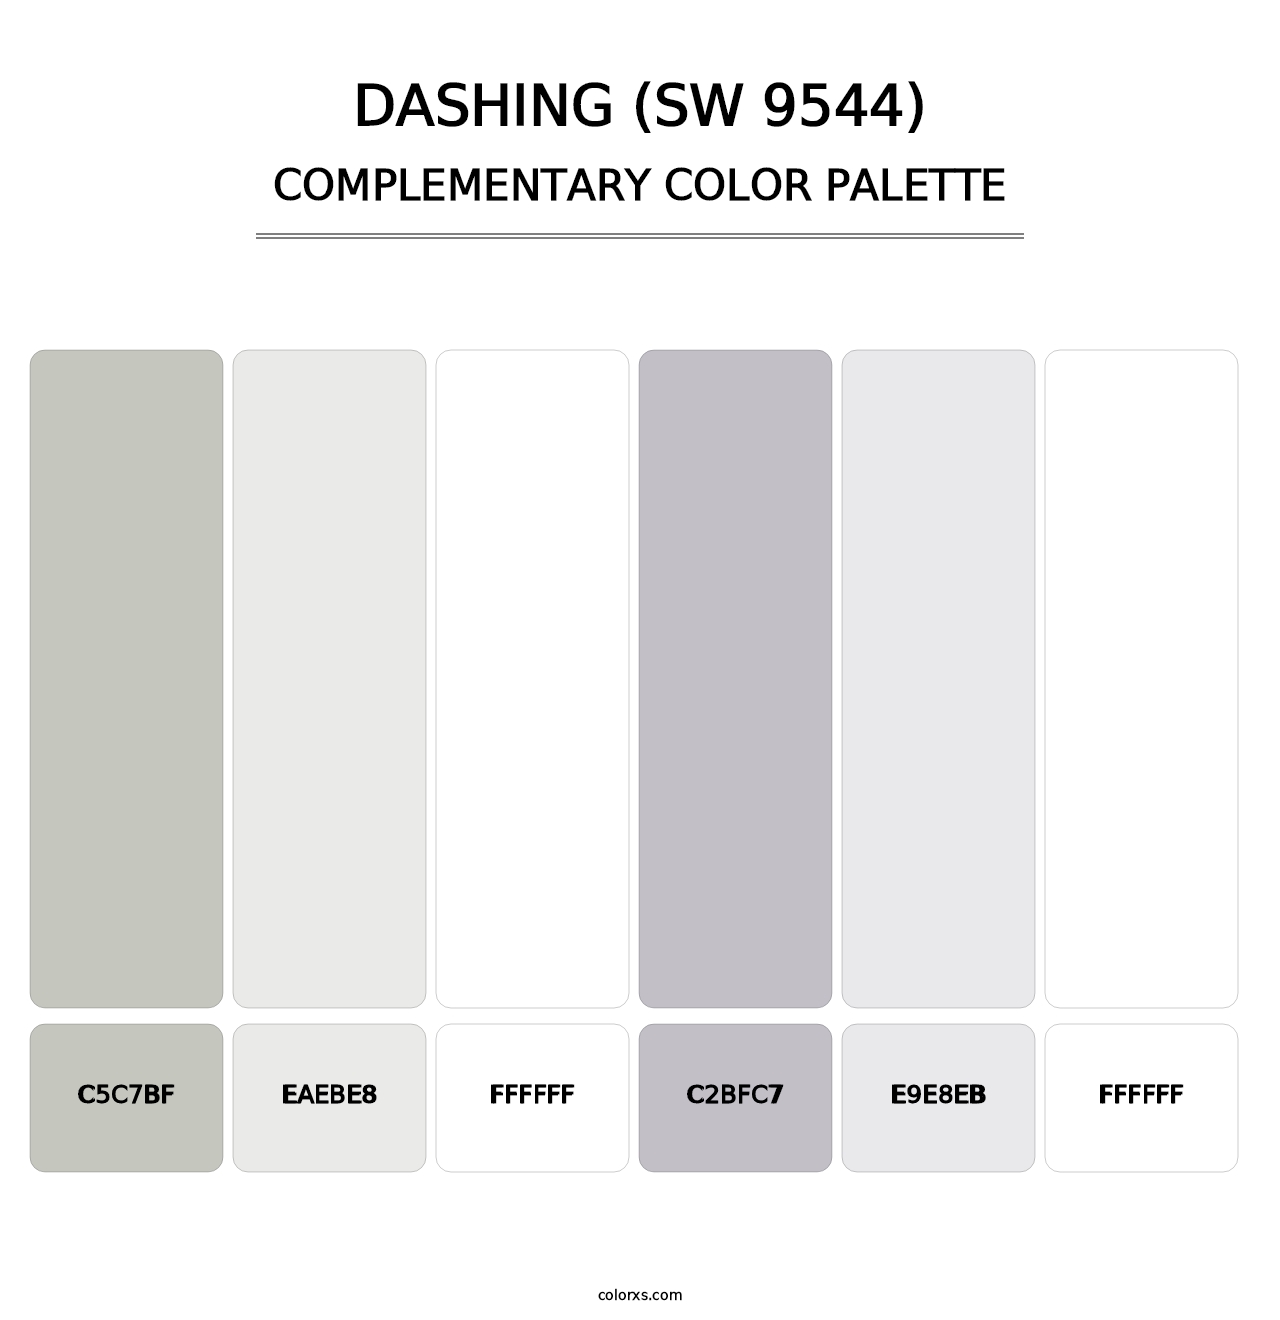 Dashing (SW 9544) - Complementary Color Palette